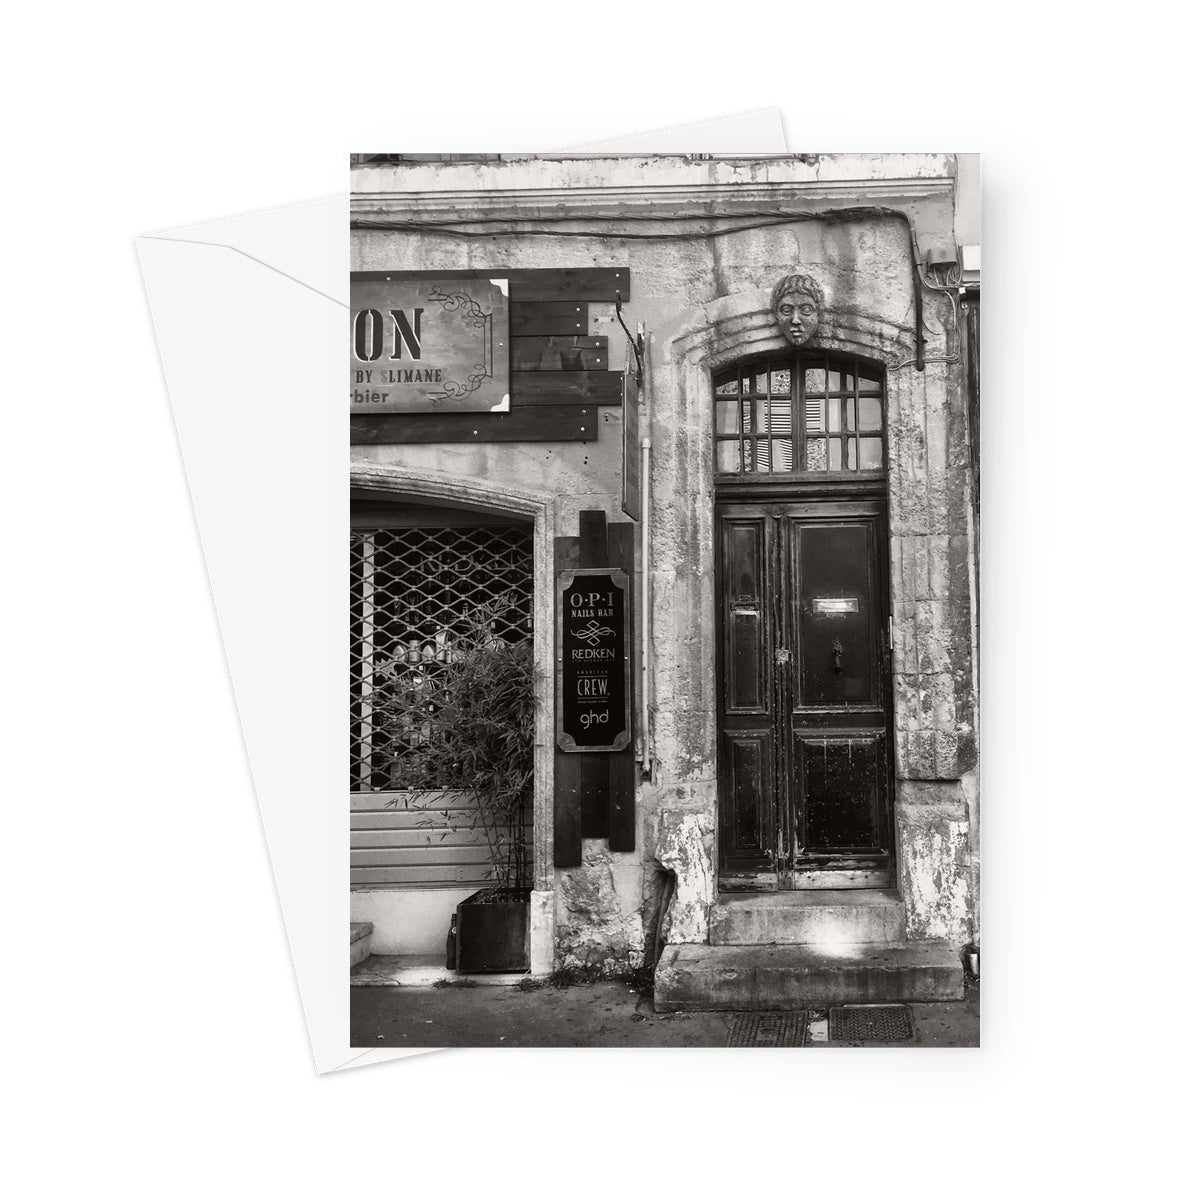 Greeting card showing old doorway on the right in black and white. Carved head is positioned over the top of the doorway. A shop is shown partially to the left.